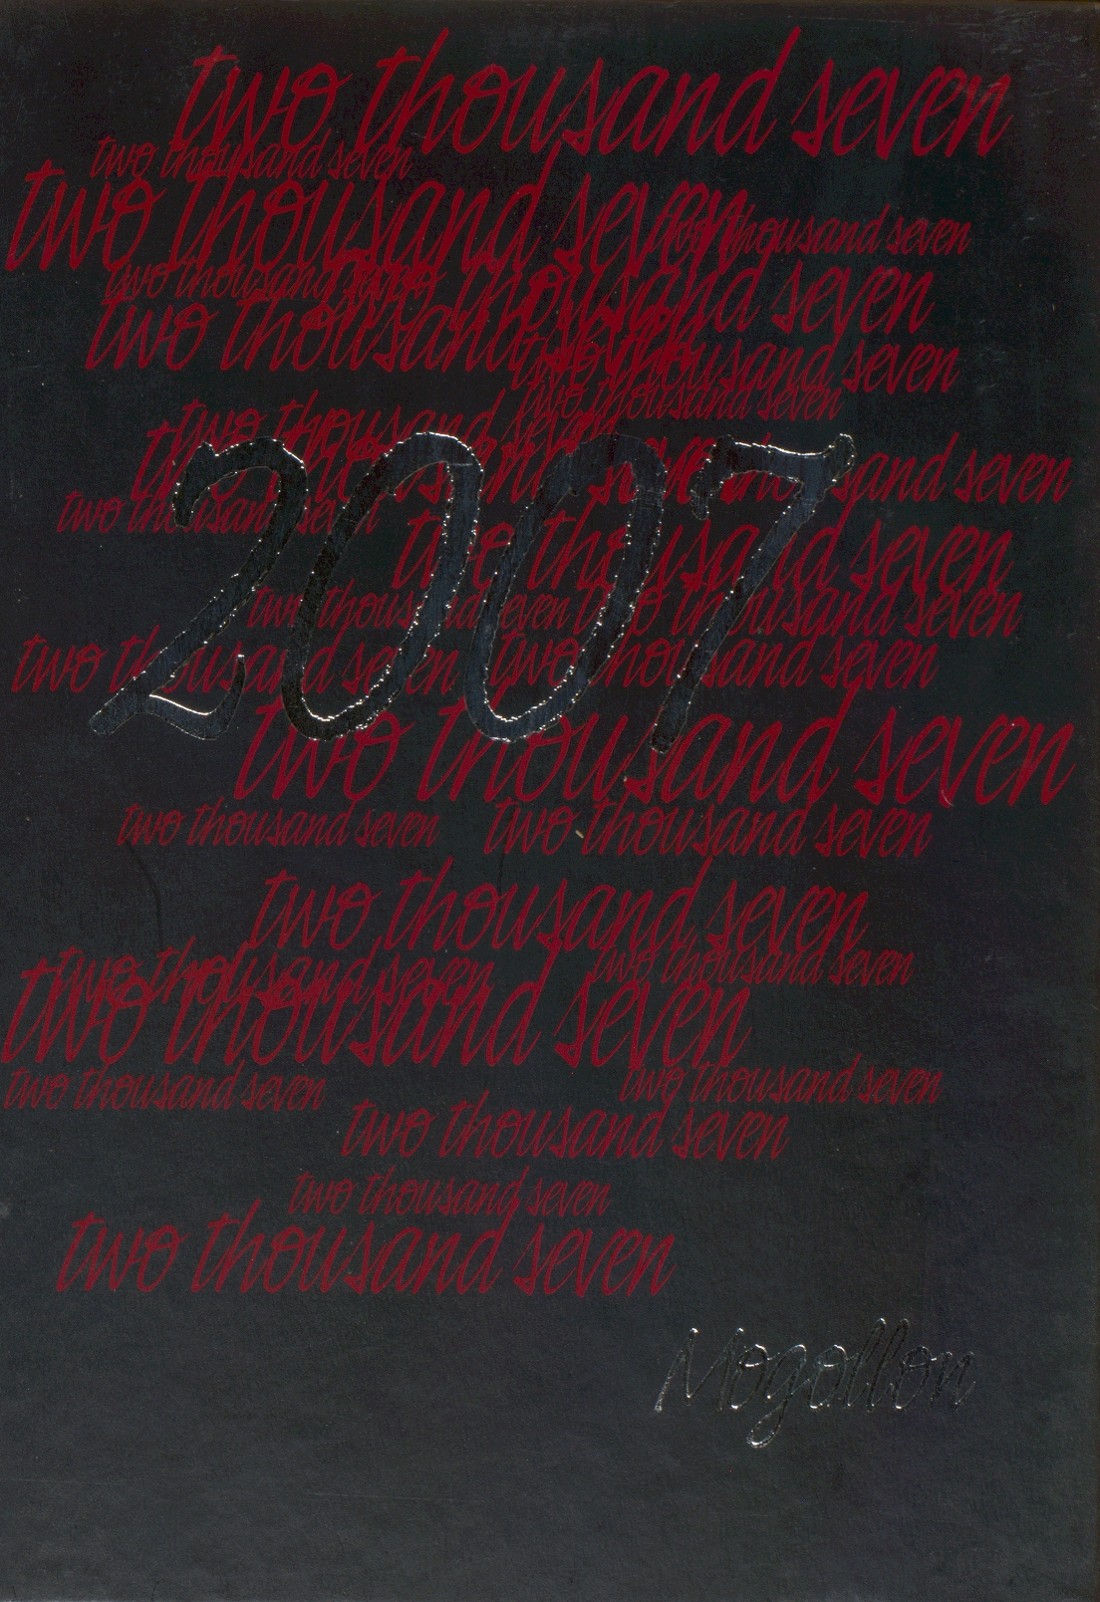 2007 yearbook from Mogollon High School from Heber, Arizona for sale